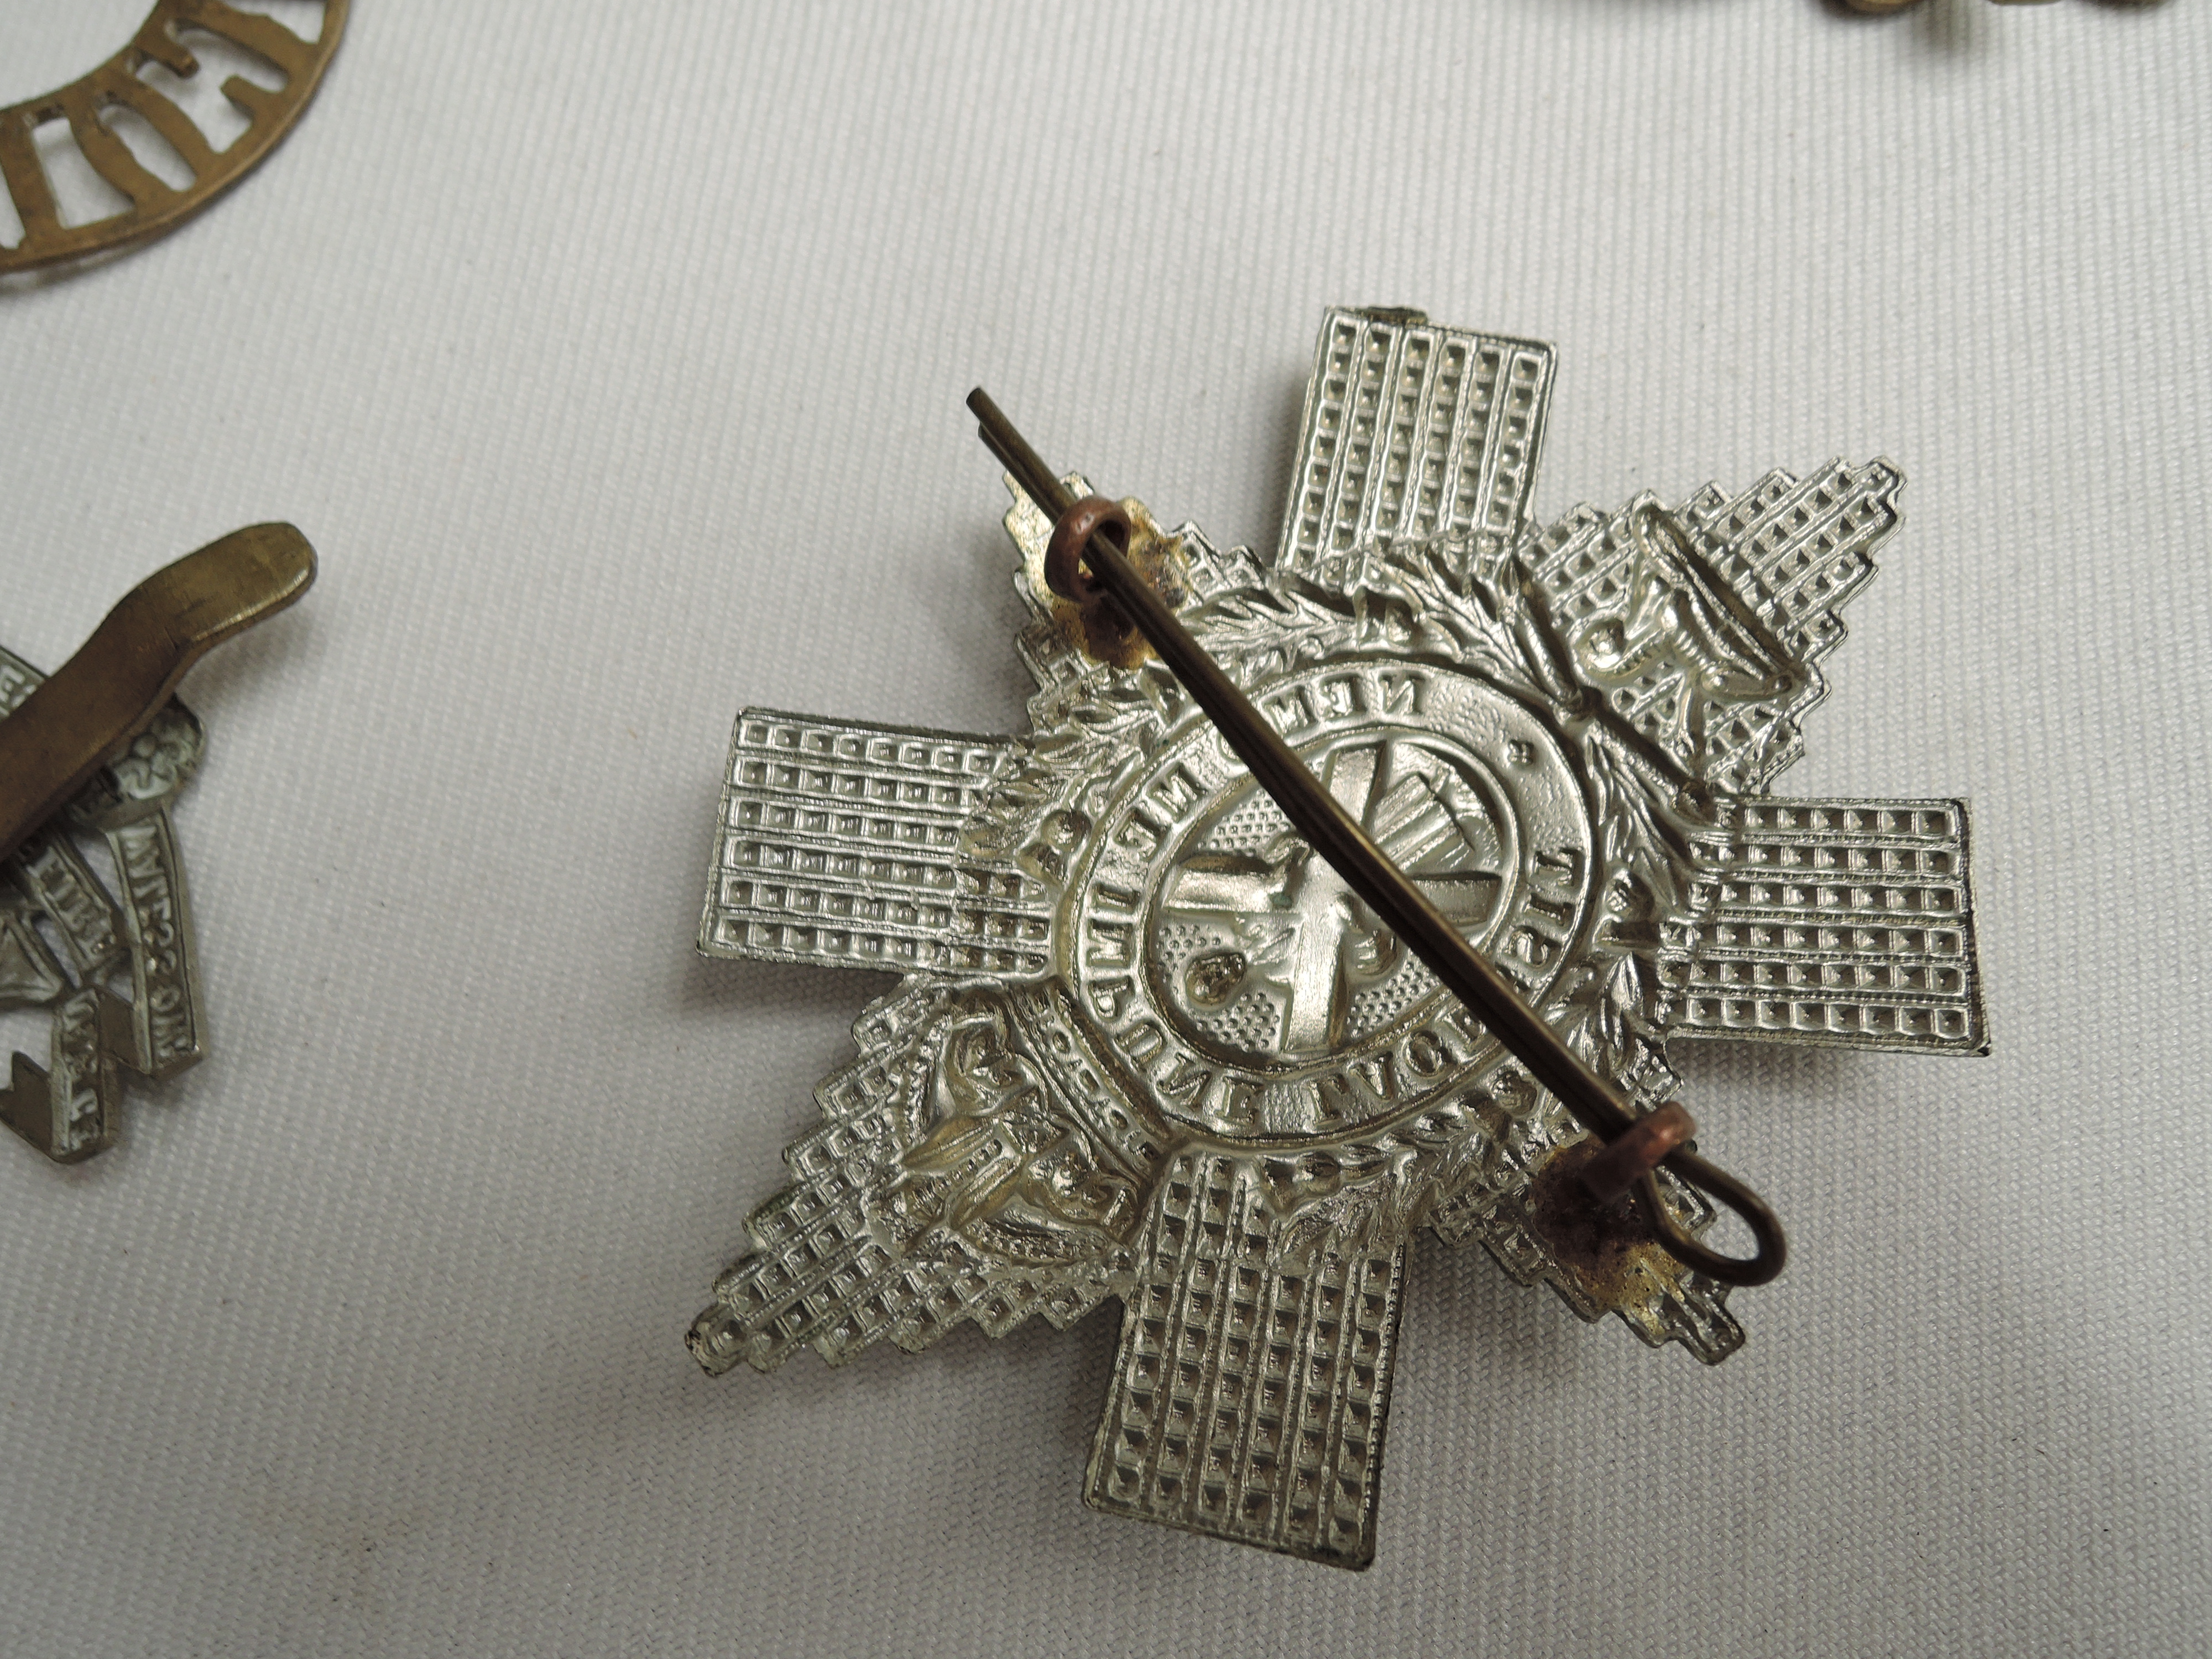 A collection of Army/Military Cap Badges along with a small collection of Coins - Image 5 of 7